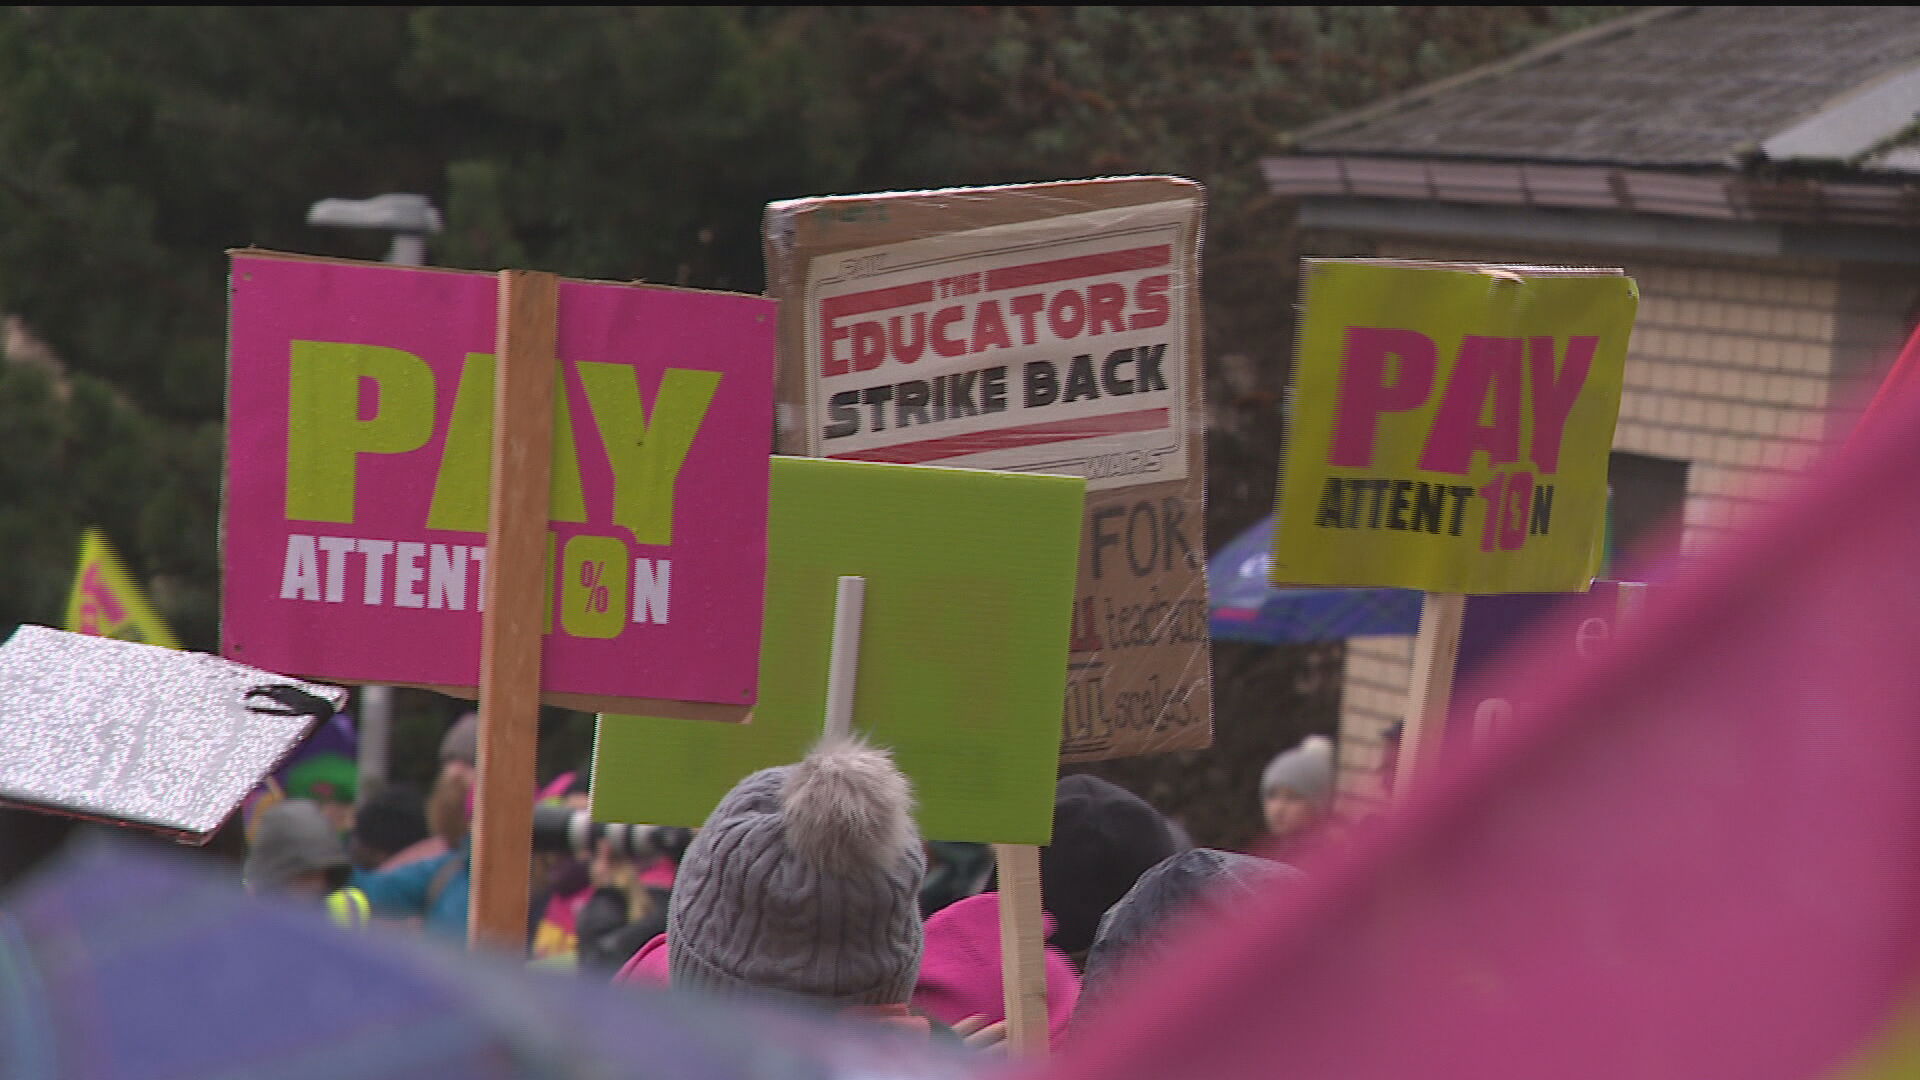 Schools across Scotland were closed before a new deal was reached on teachers' pay